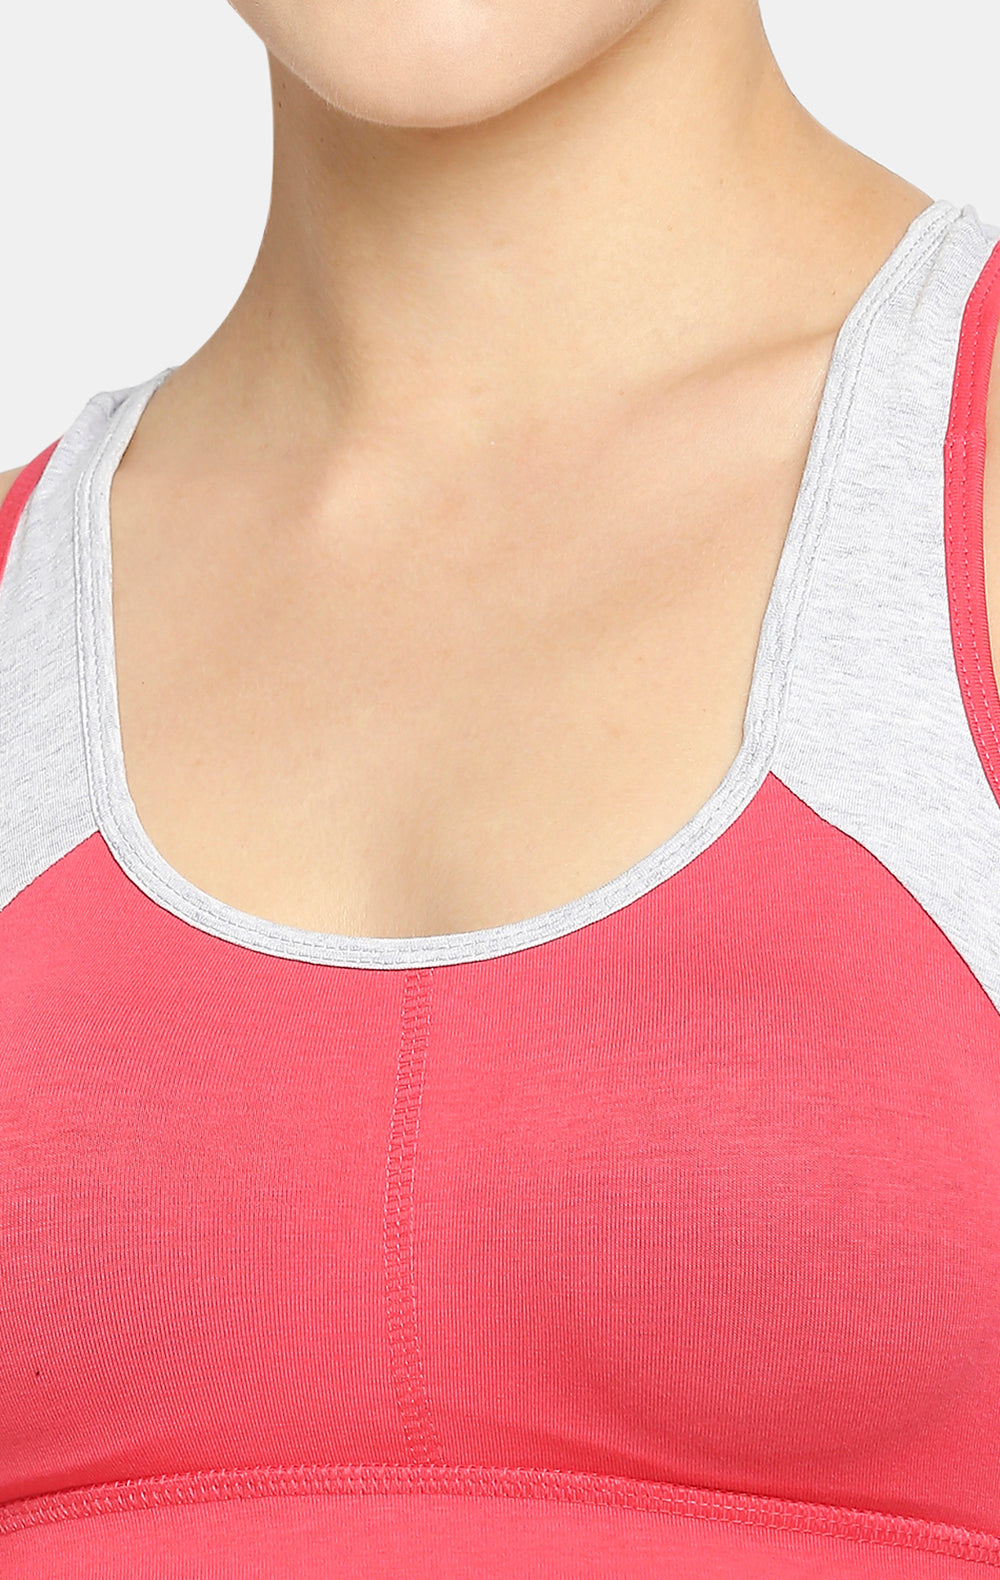 Red Rose Sports Pink Bra with Removable pads